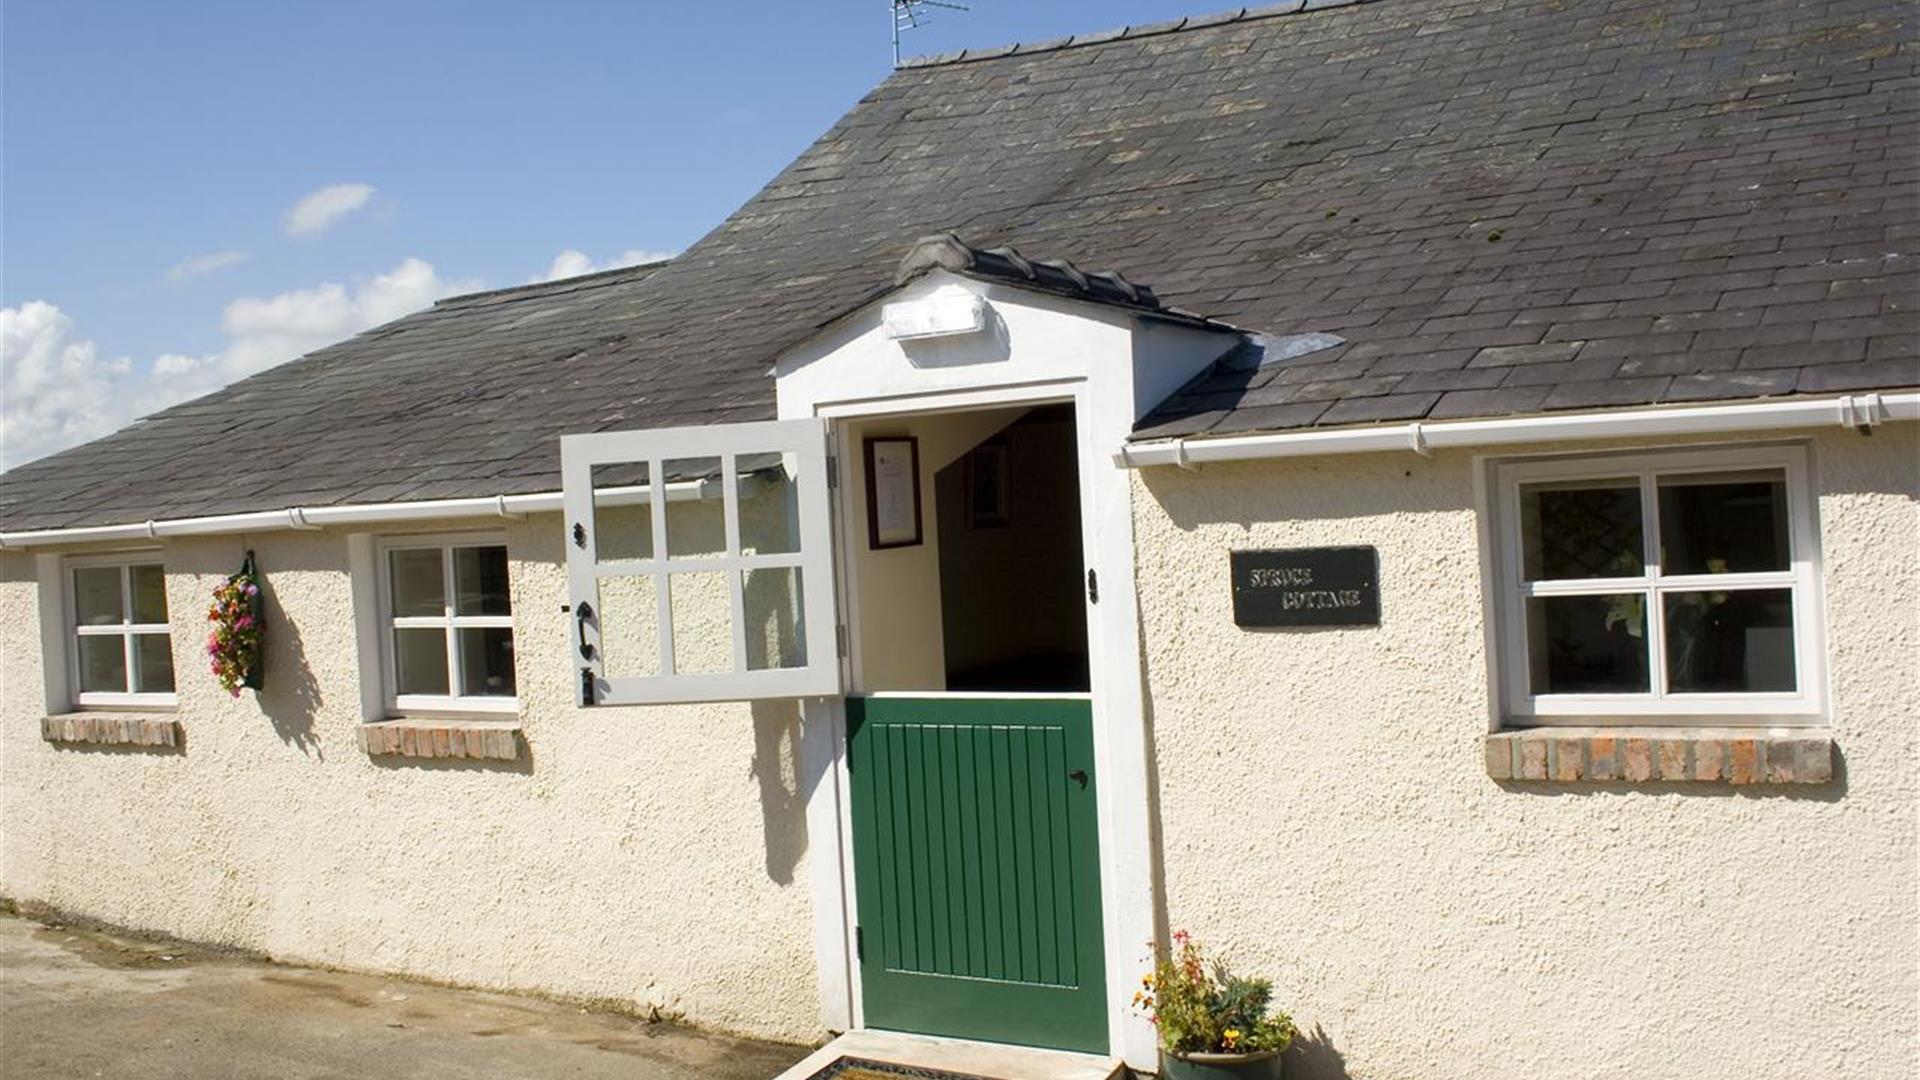 Image shows front of cottage with green stable door as entrance